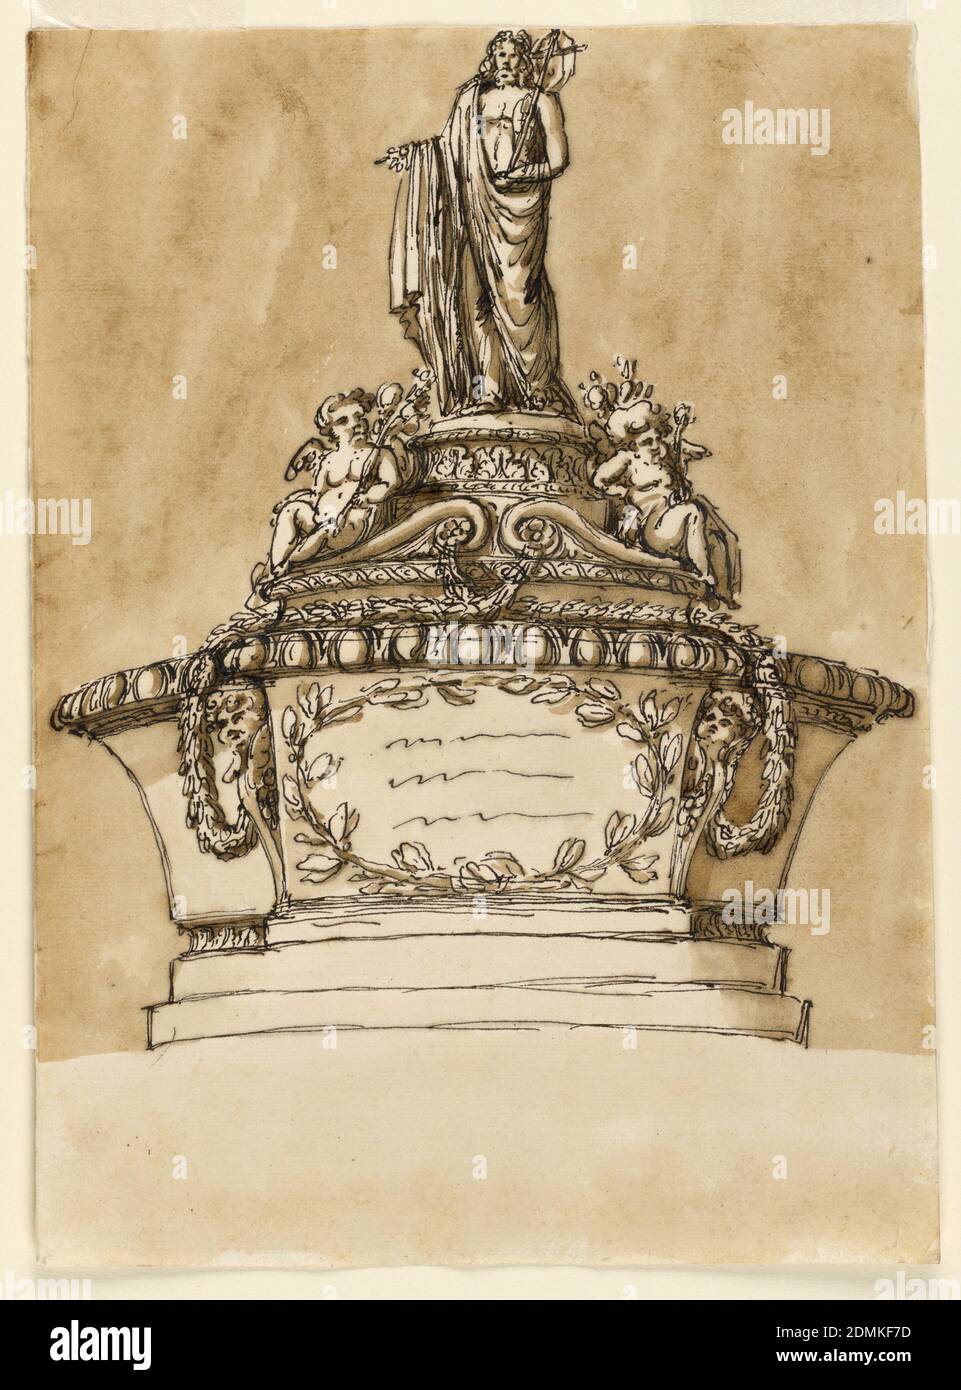 Baptismal Font, Pen and brown ink, brush and brown wash, red ink on cream laid paper, The bowl is supported by two plinths. The central part is shaped like a tablet, framed laterally by two gaines, and bearing an inscription in a wreath, formed by two branches. The diameter of the lid corresponds to that of the front. In front, cornices of a broken pediment from which festoons hang toward the gaines. At the ends of the cornices sit two angels with lily stems. They lean upon the round base of a statue of St. John the Baptist with shouldered cross staff., Rome, Italy, ca. 1775, architecture Stock Photo